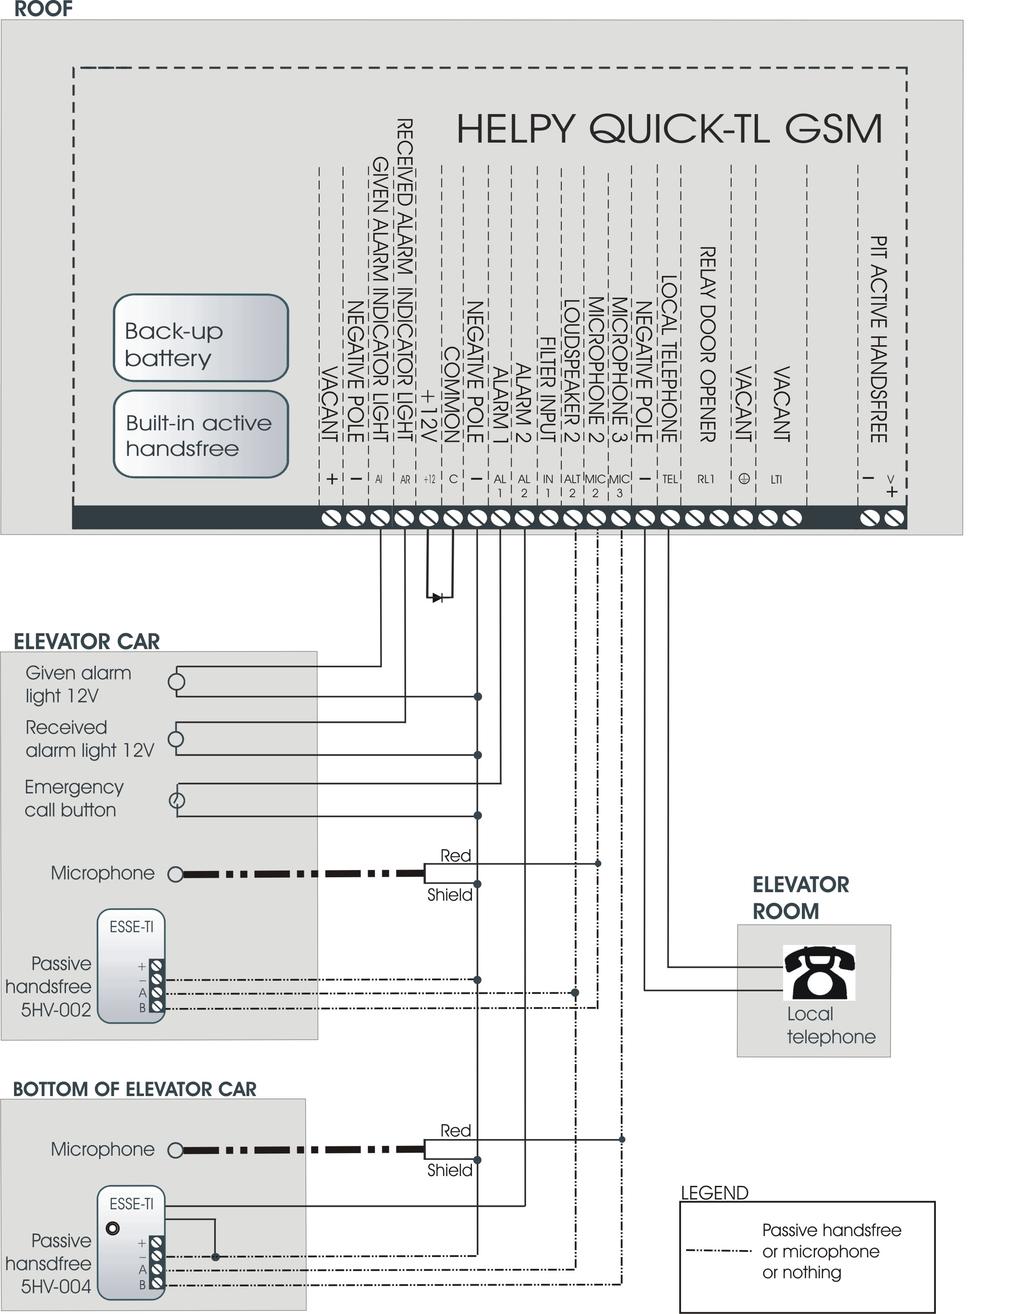 WIRING DIAGRAM WITH PASSIVE HANDSFREE TERMINAL